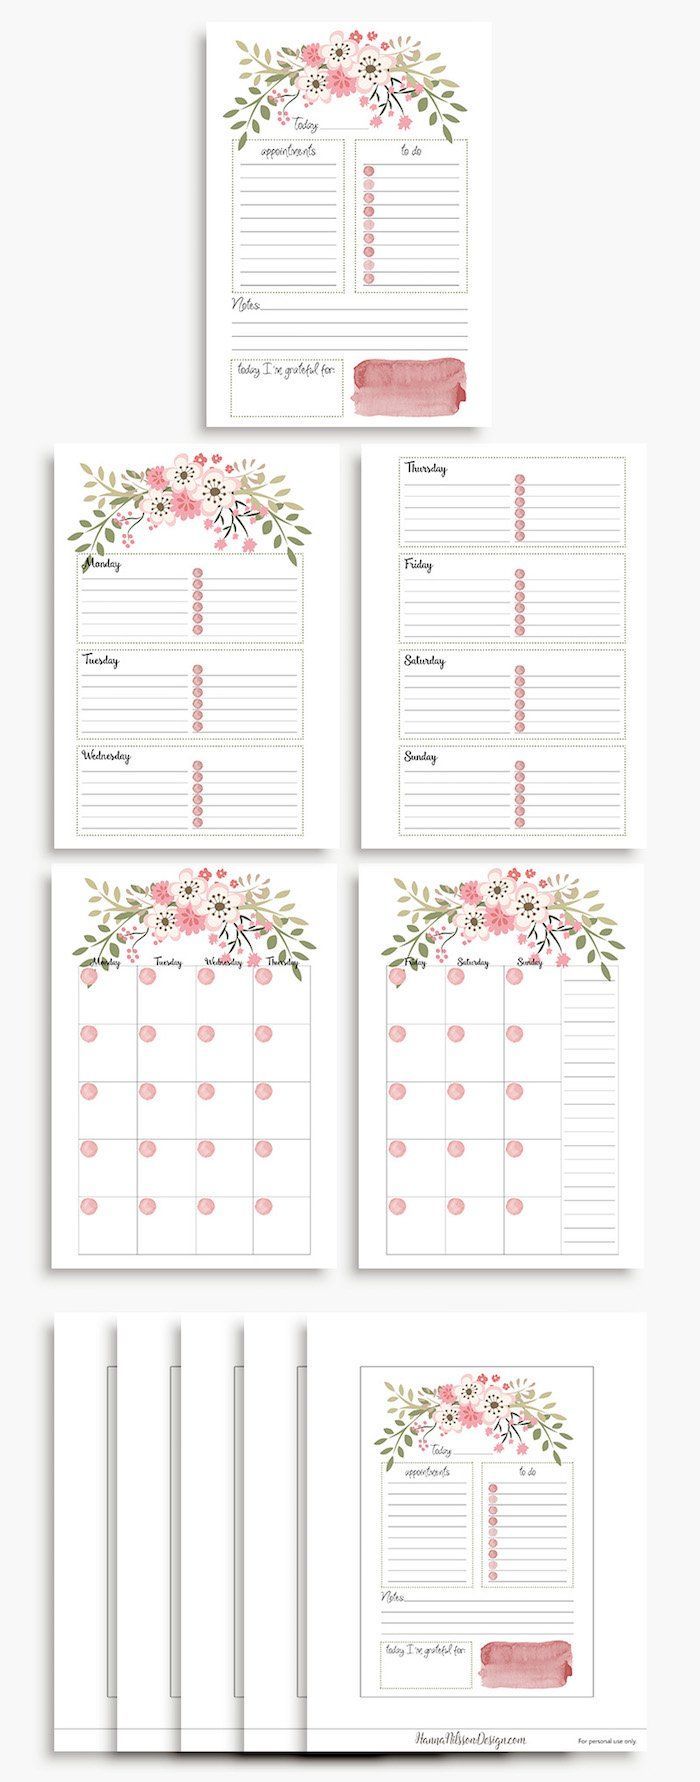 gue deco planner free